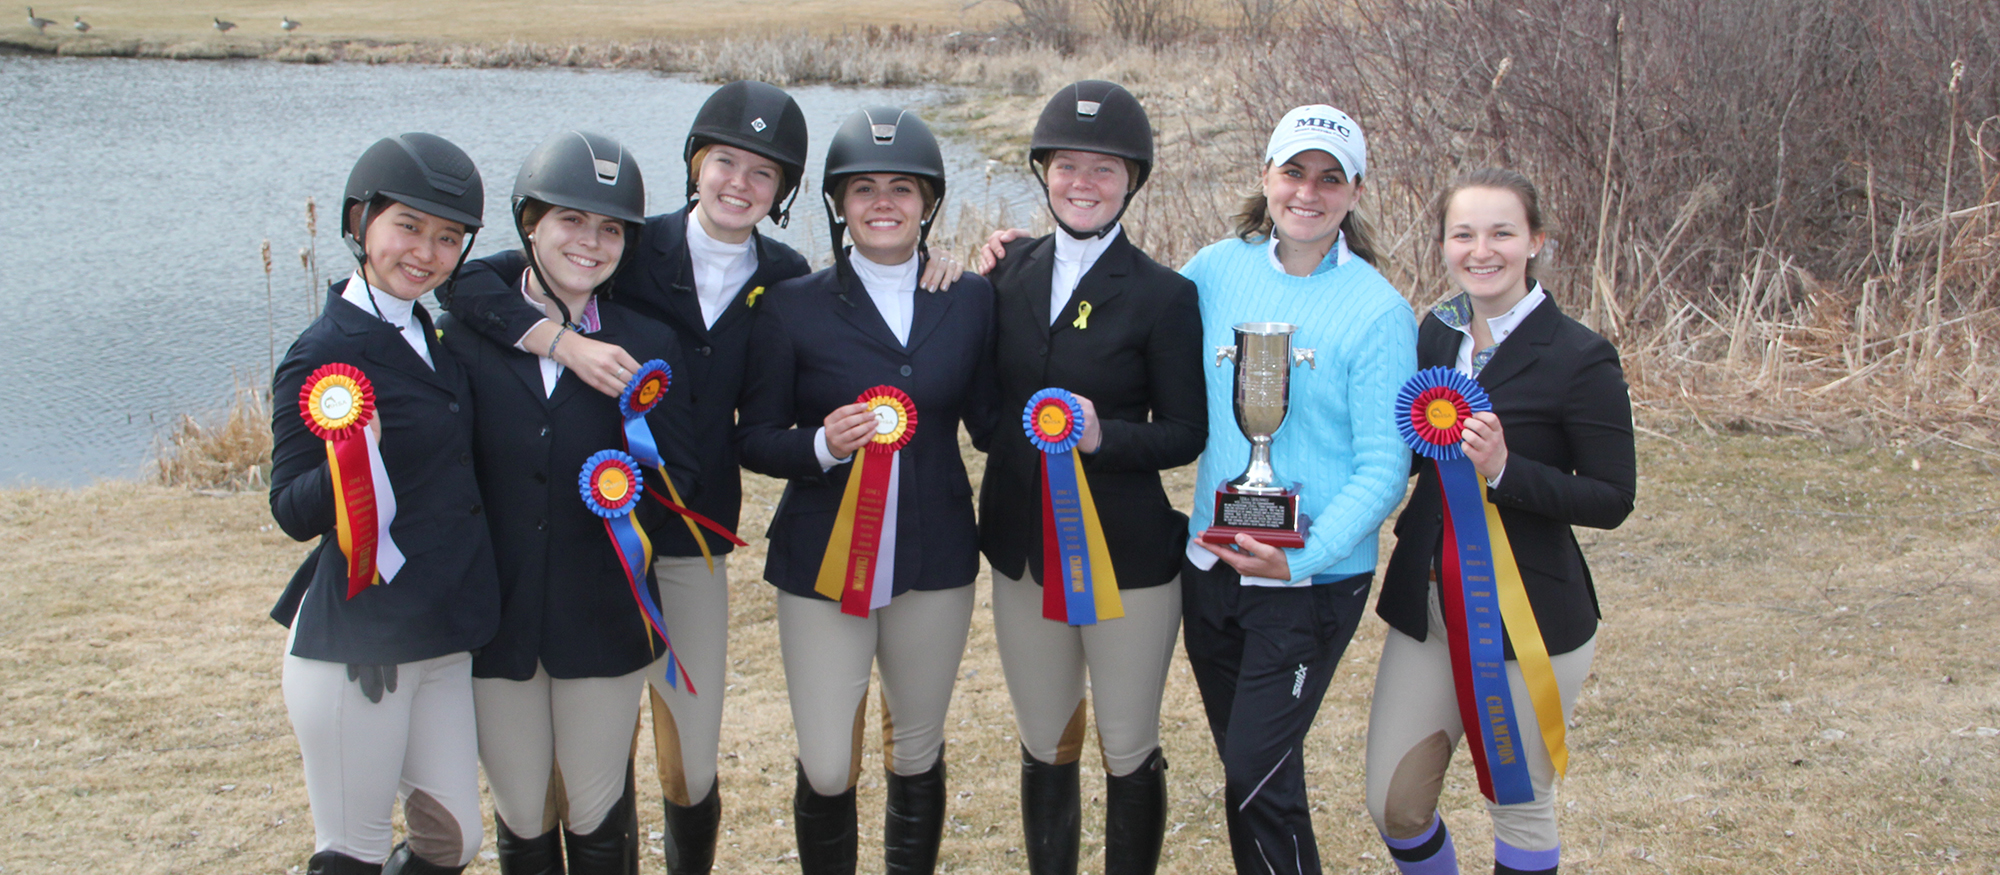 Photo of various riders following competition at the 2019 IHSA Zone 1 Region III Championships.